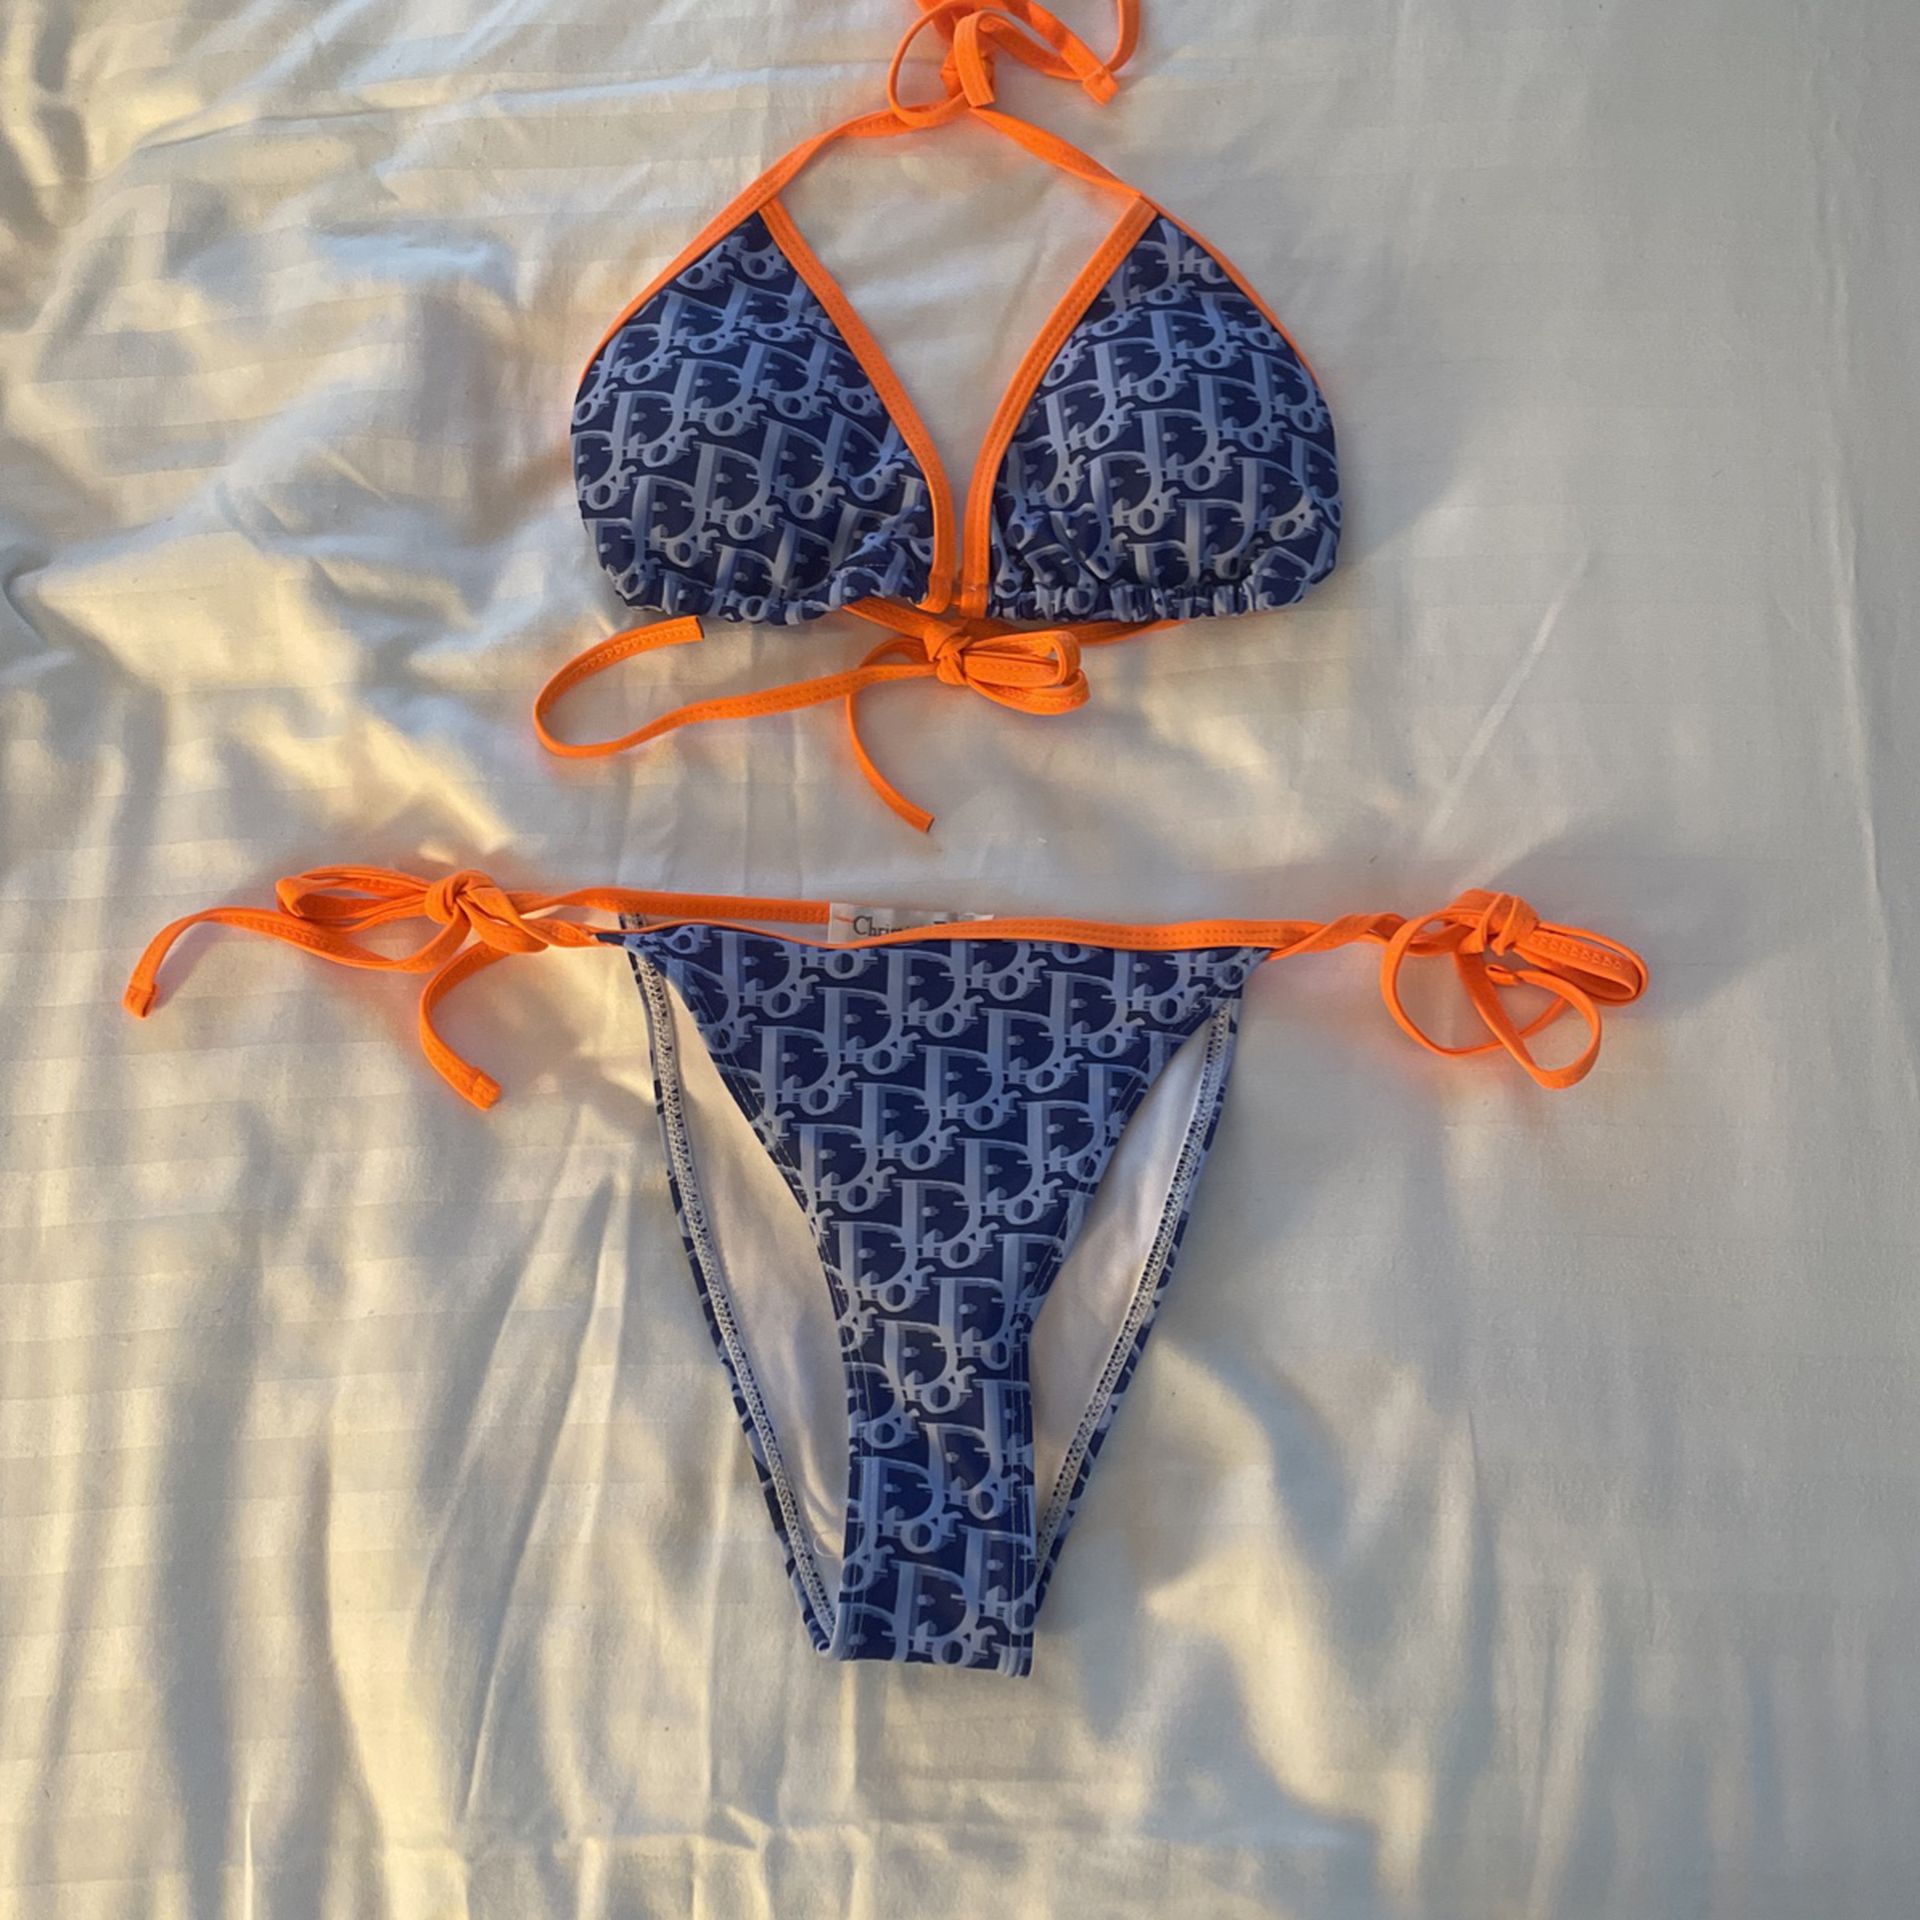 Dior Toddler Bathing Suit for Sale in New York, NY - OfferUp